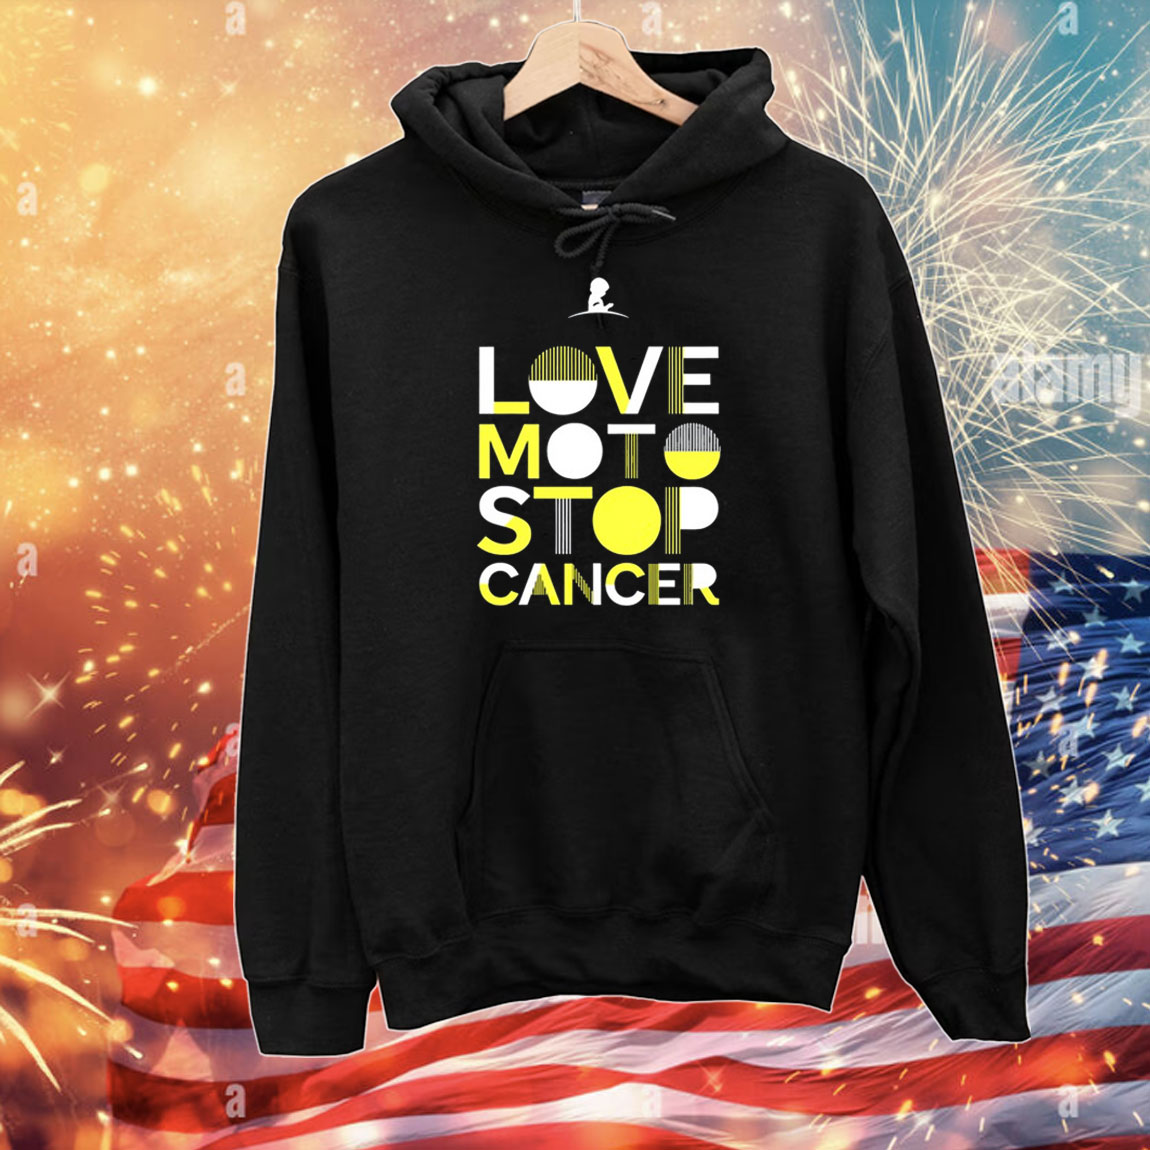 St. Jude Love Moto Stop Cancer T-Shirts